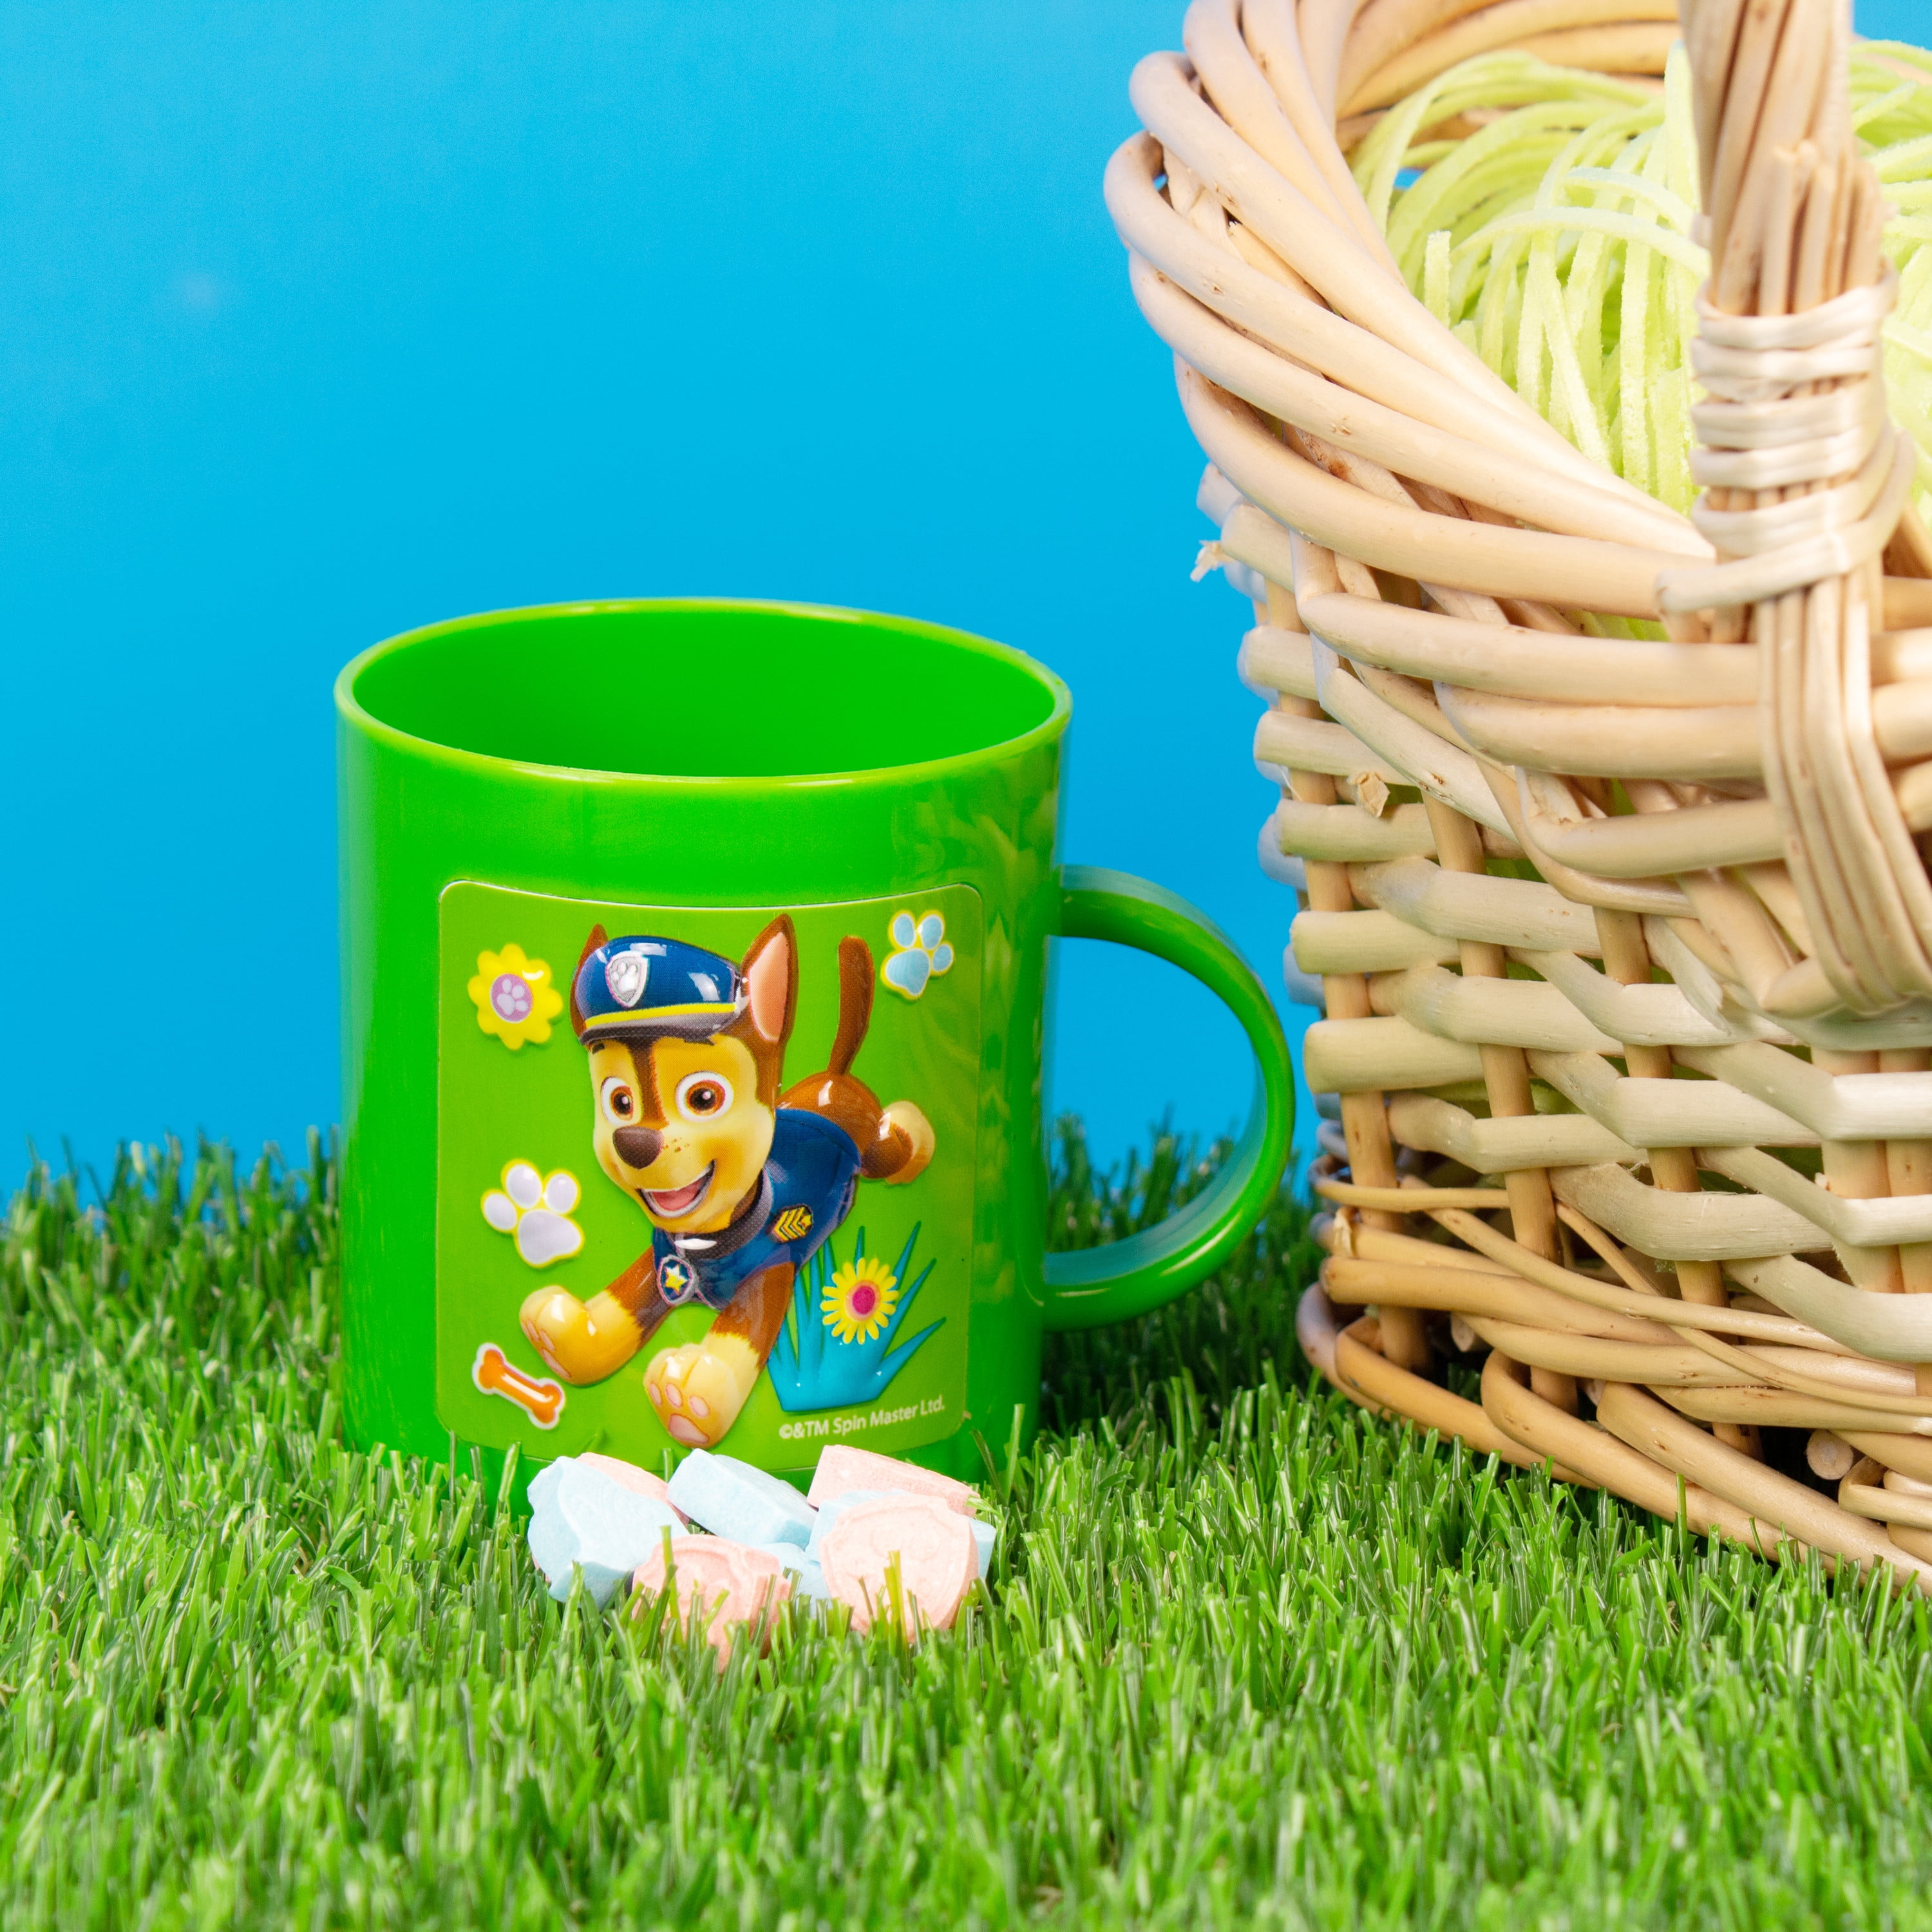 PAW Patrol Fun Cup with Candy, 0.98 Ounces 